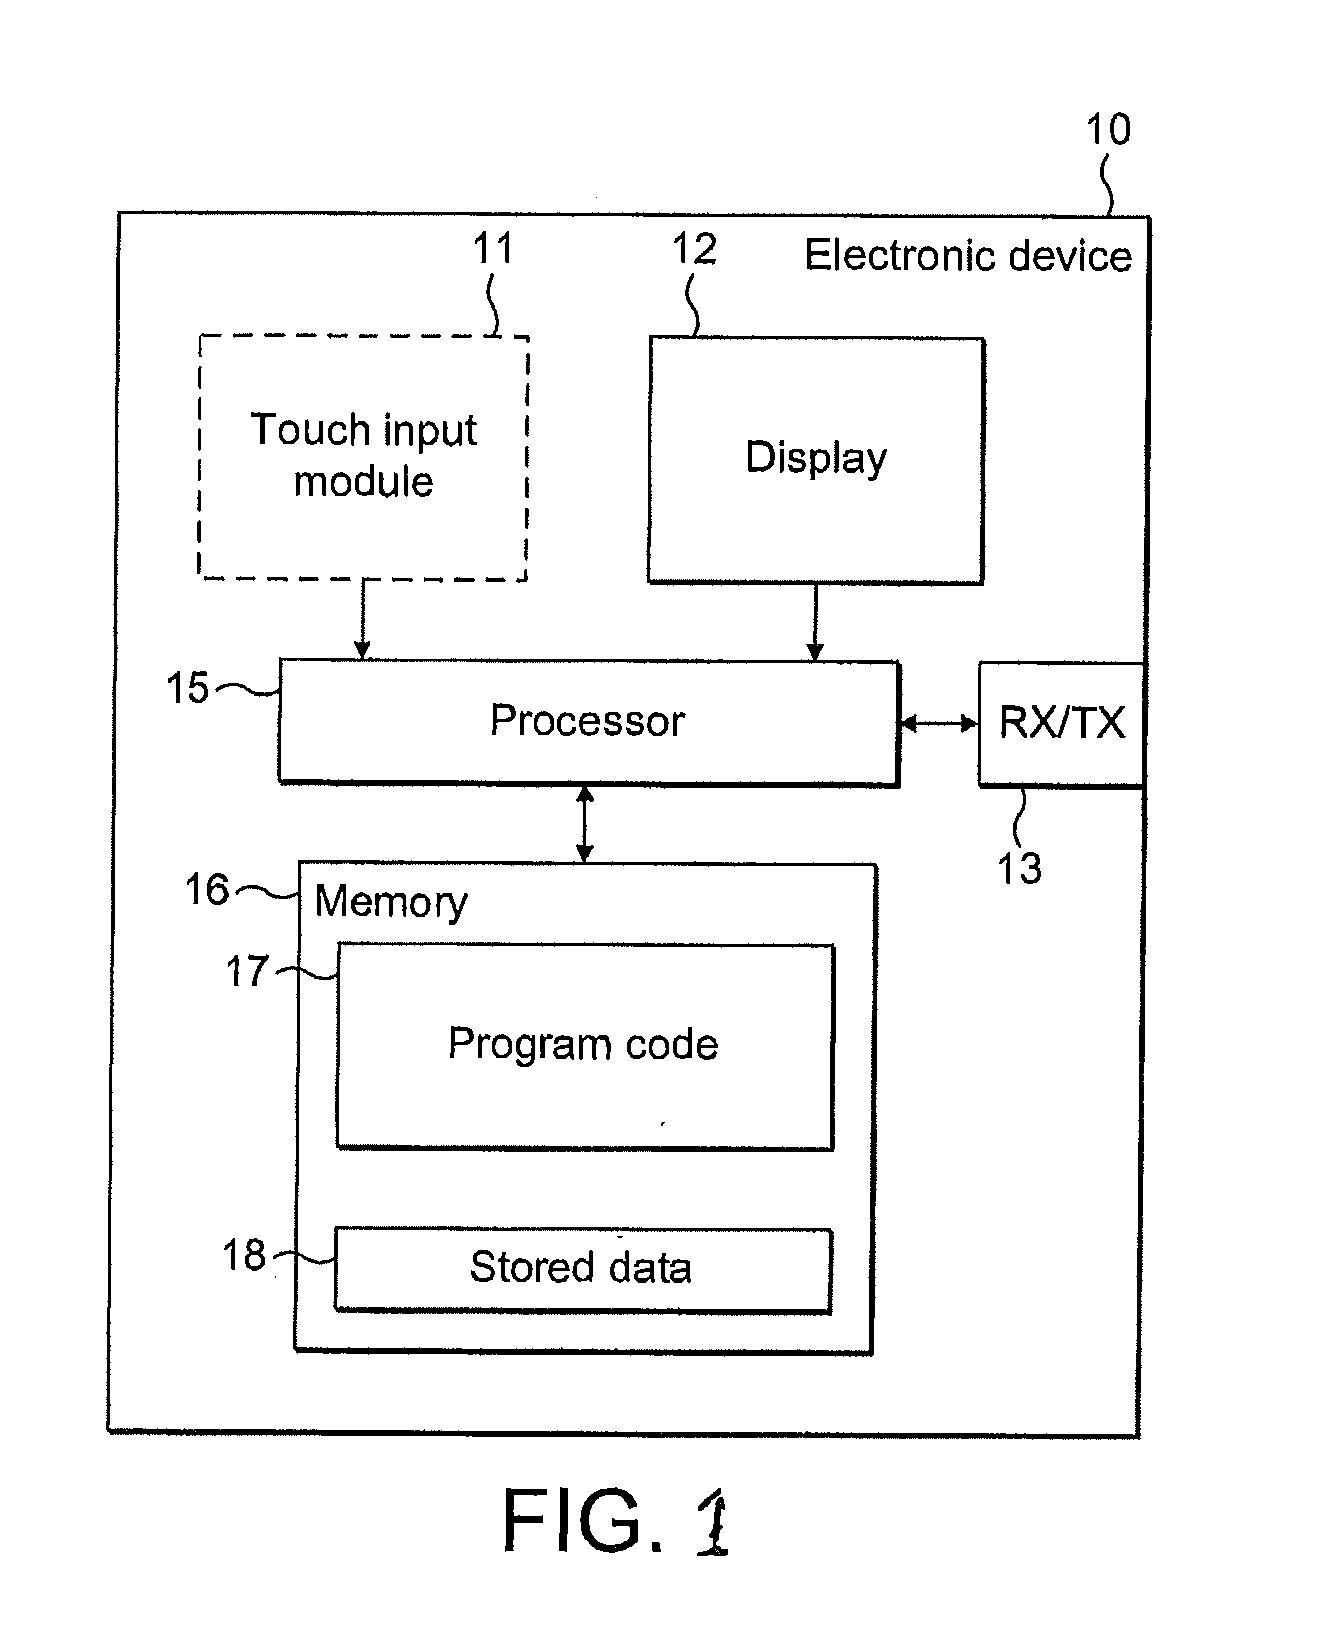 Display apparatus producing audio and haptic output